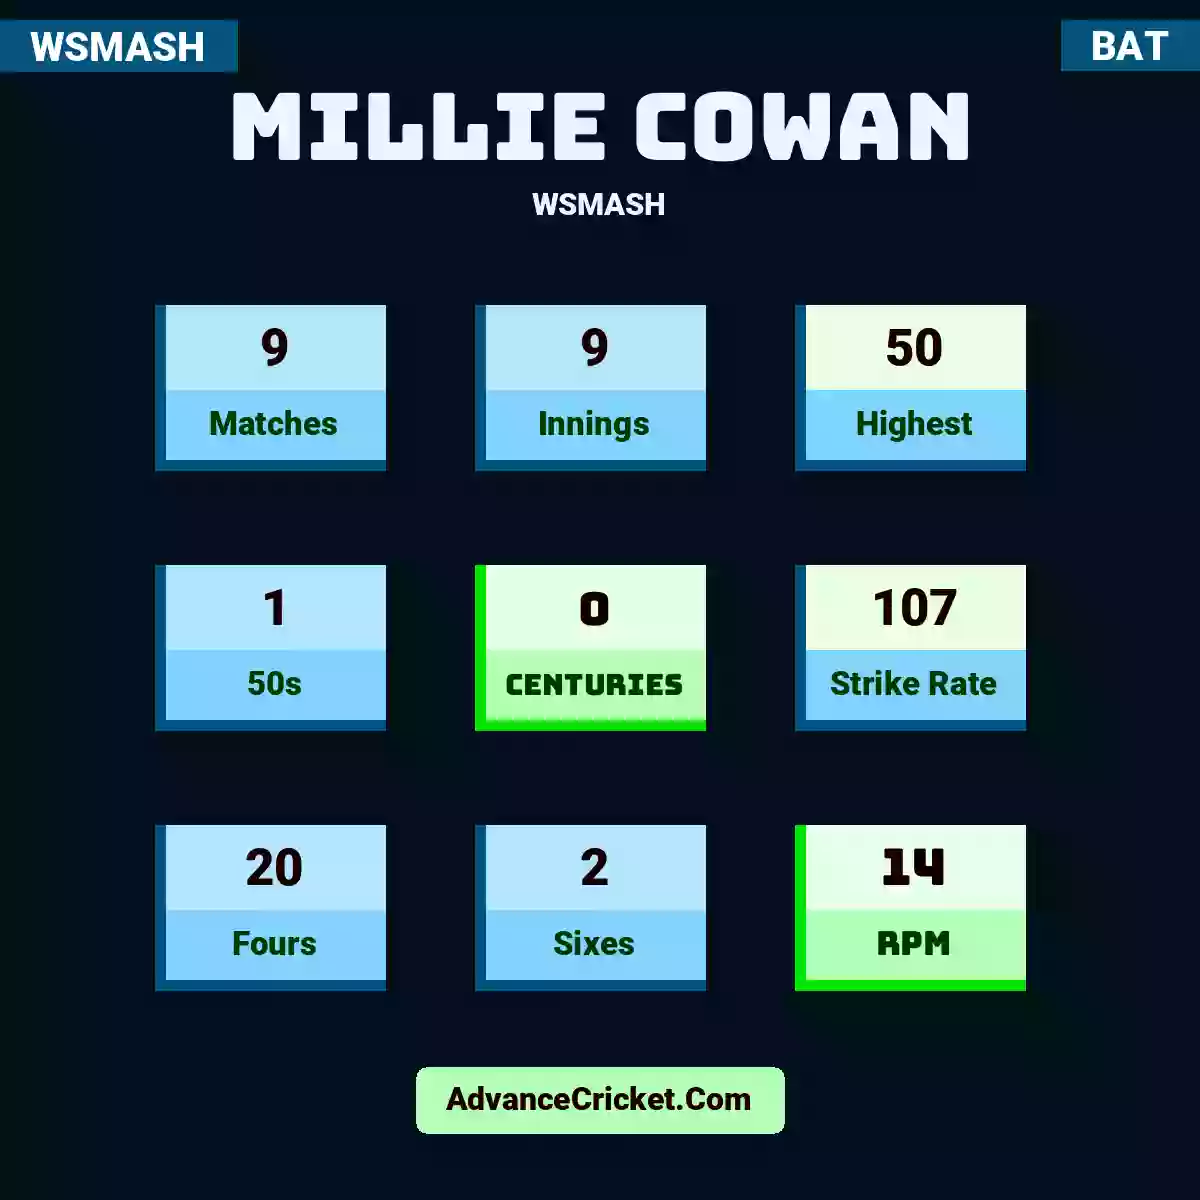 Millie Cowan WSMASH , Millie Cowan played 9 matches, scored 50 runs as highest, 1 half-centuries, and 0 centuries, with a strike rate of 107. M.Cowan hit 20 fours and 2 sixes, with an RPM of 14.